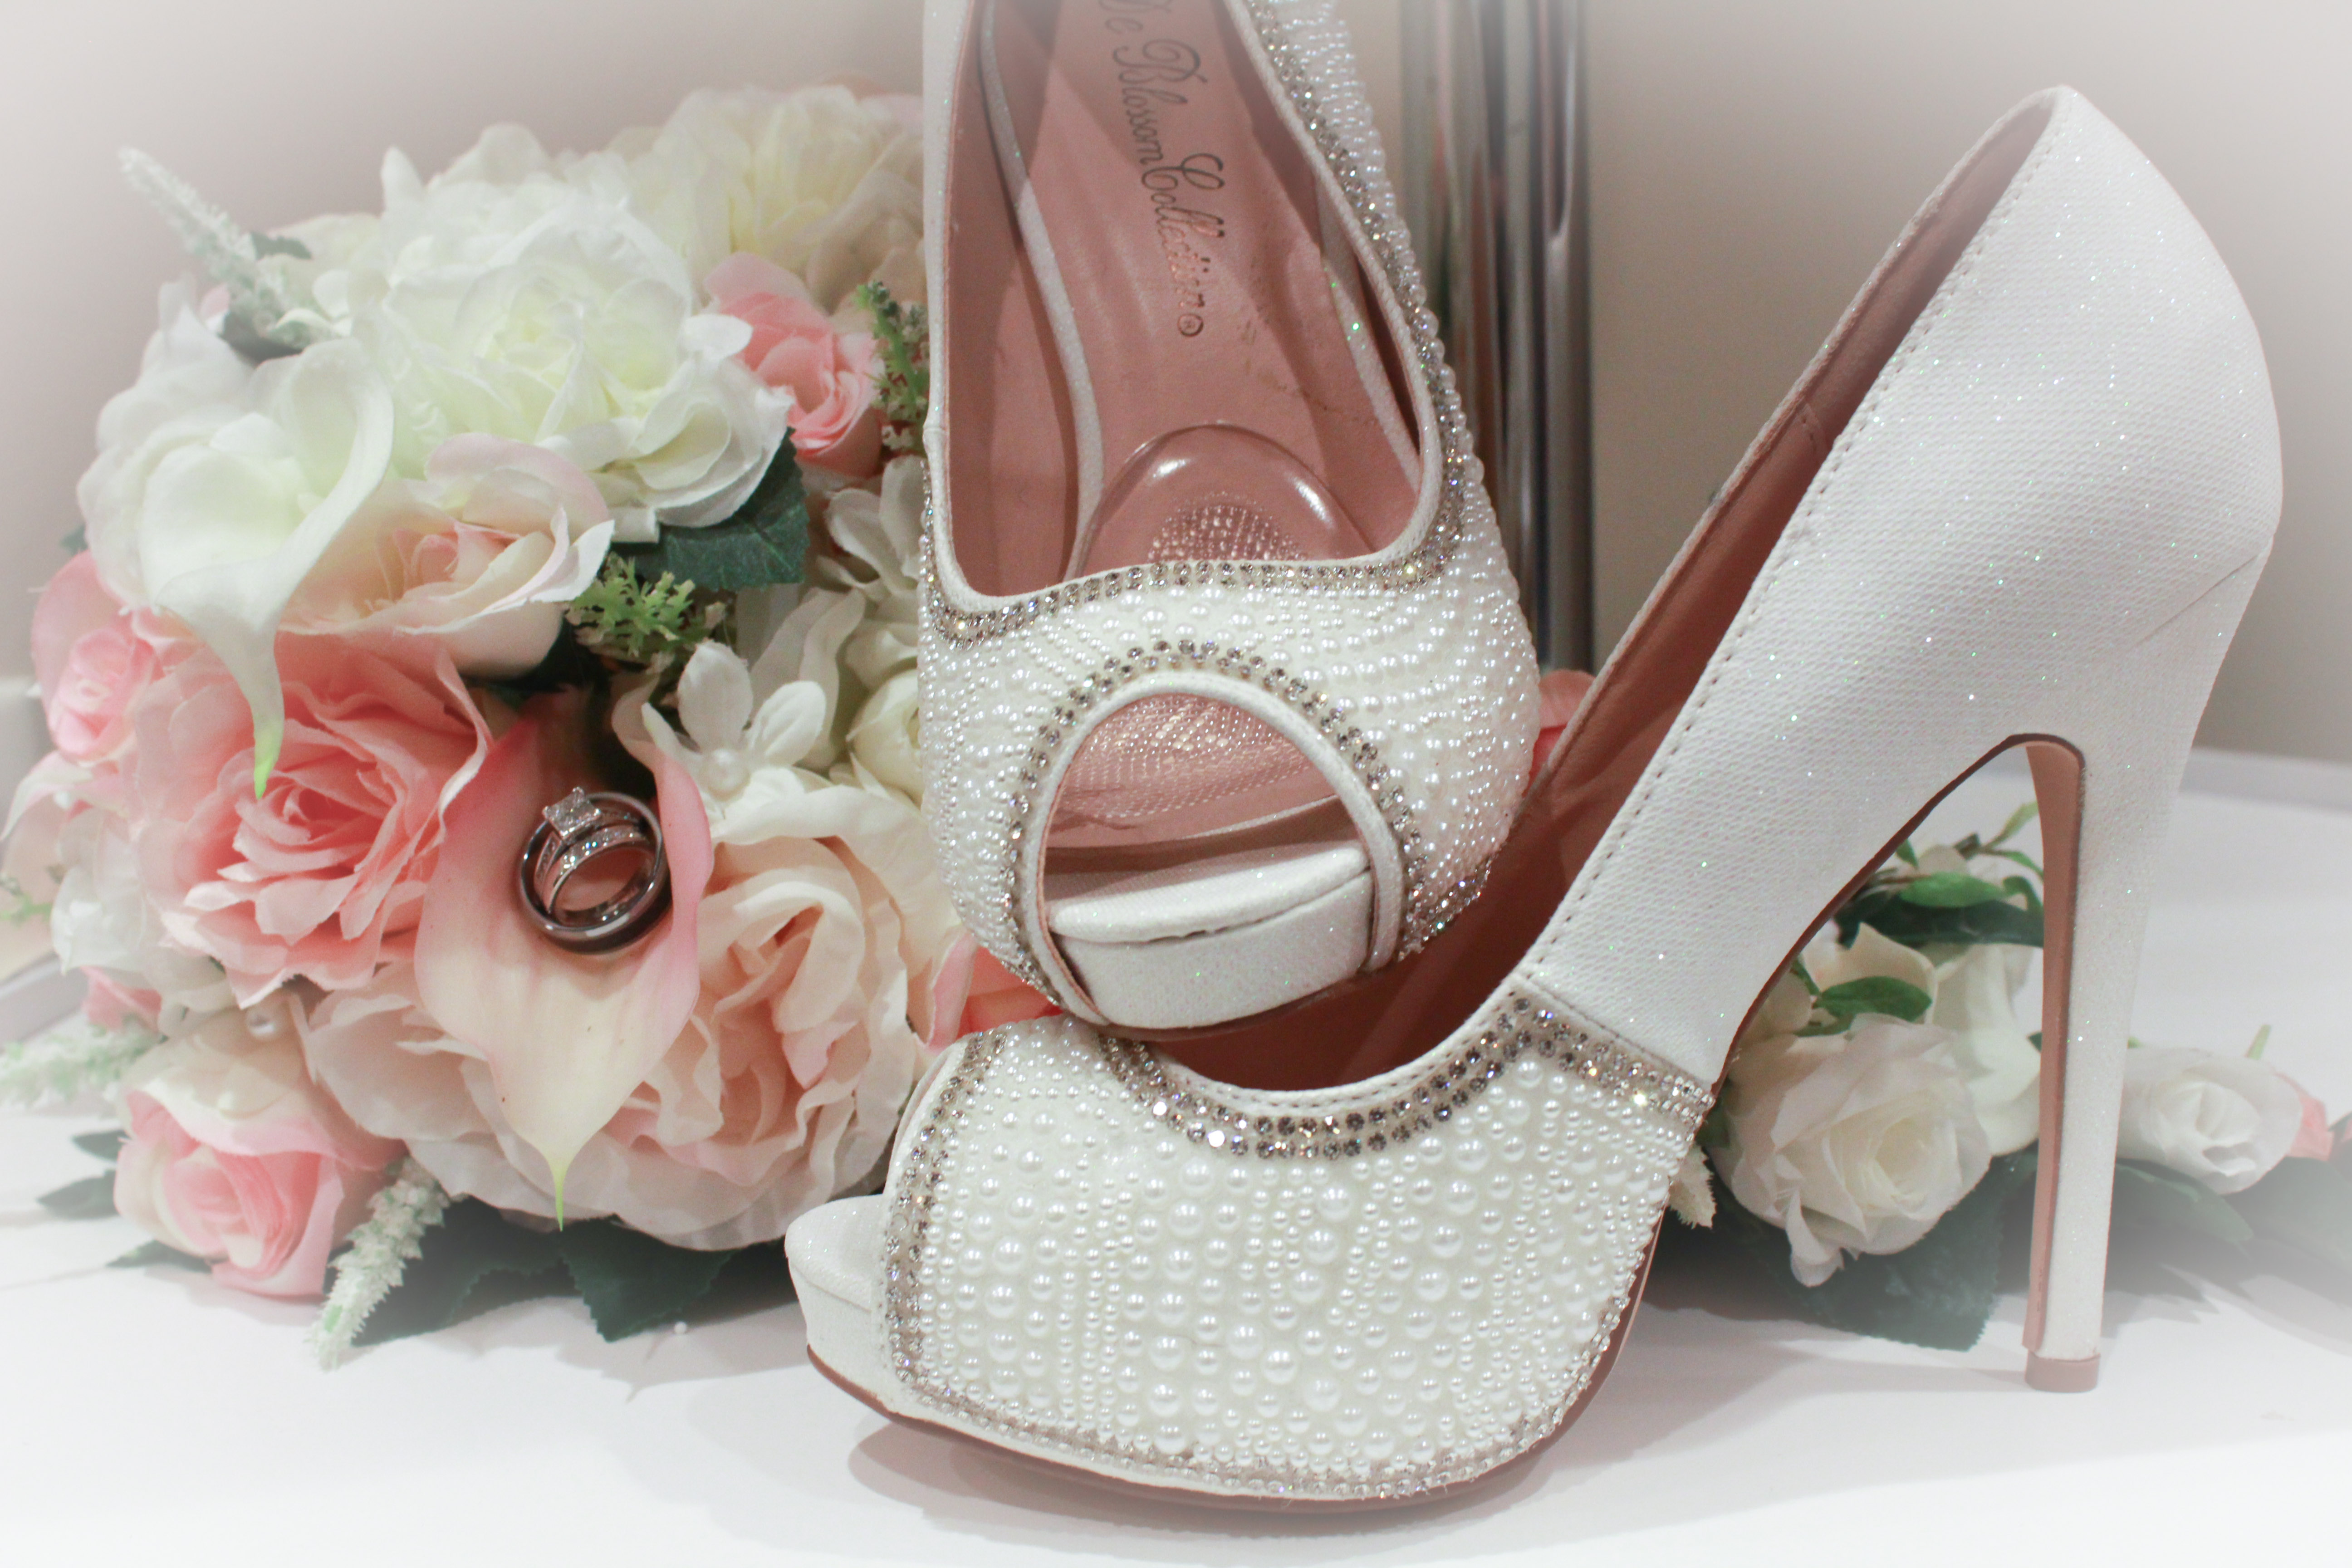 bride's bouquet and wedding shoes pink